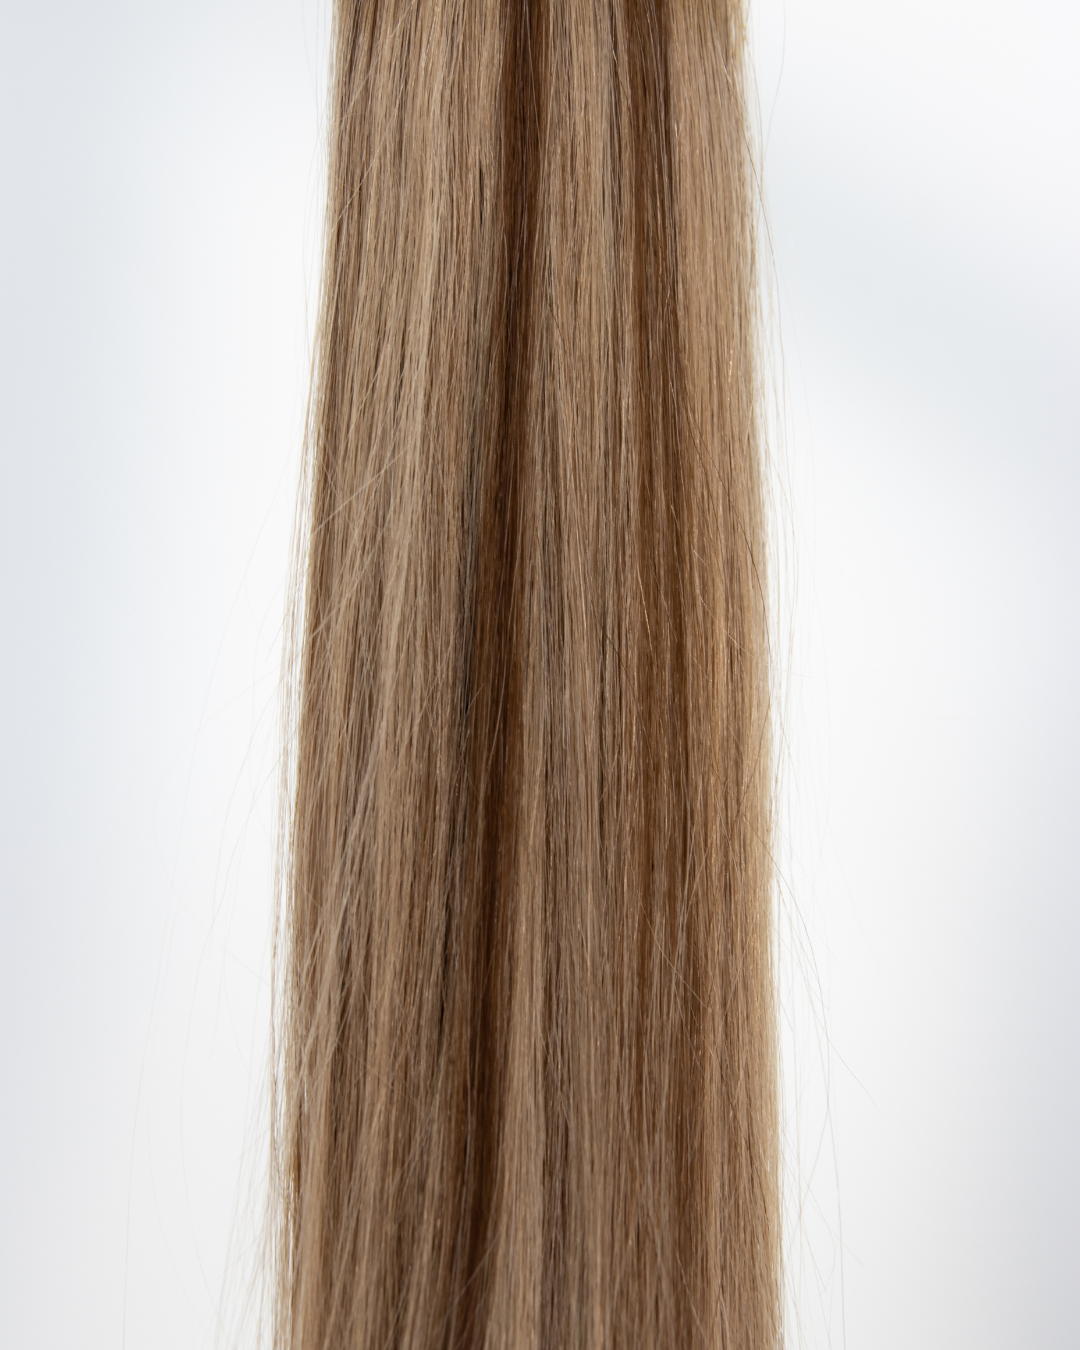 "Azalea" Dimensional Rooted Cool Bronde Extensions